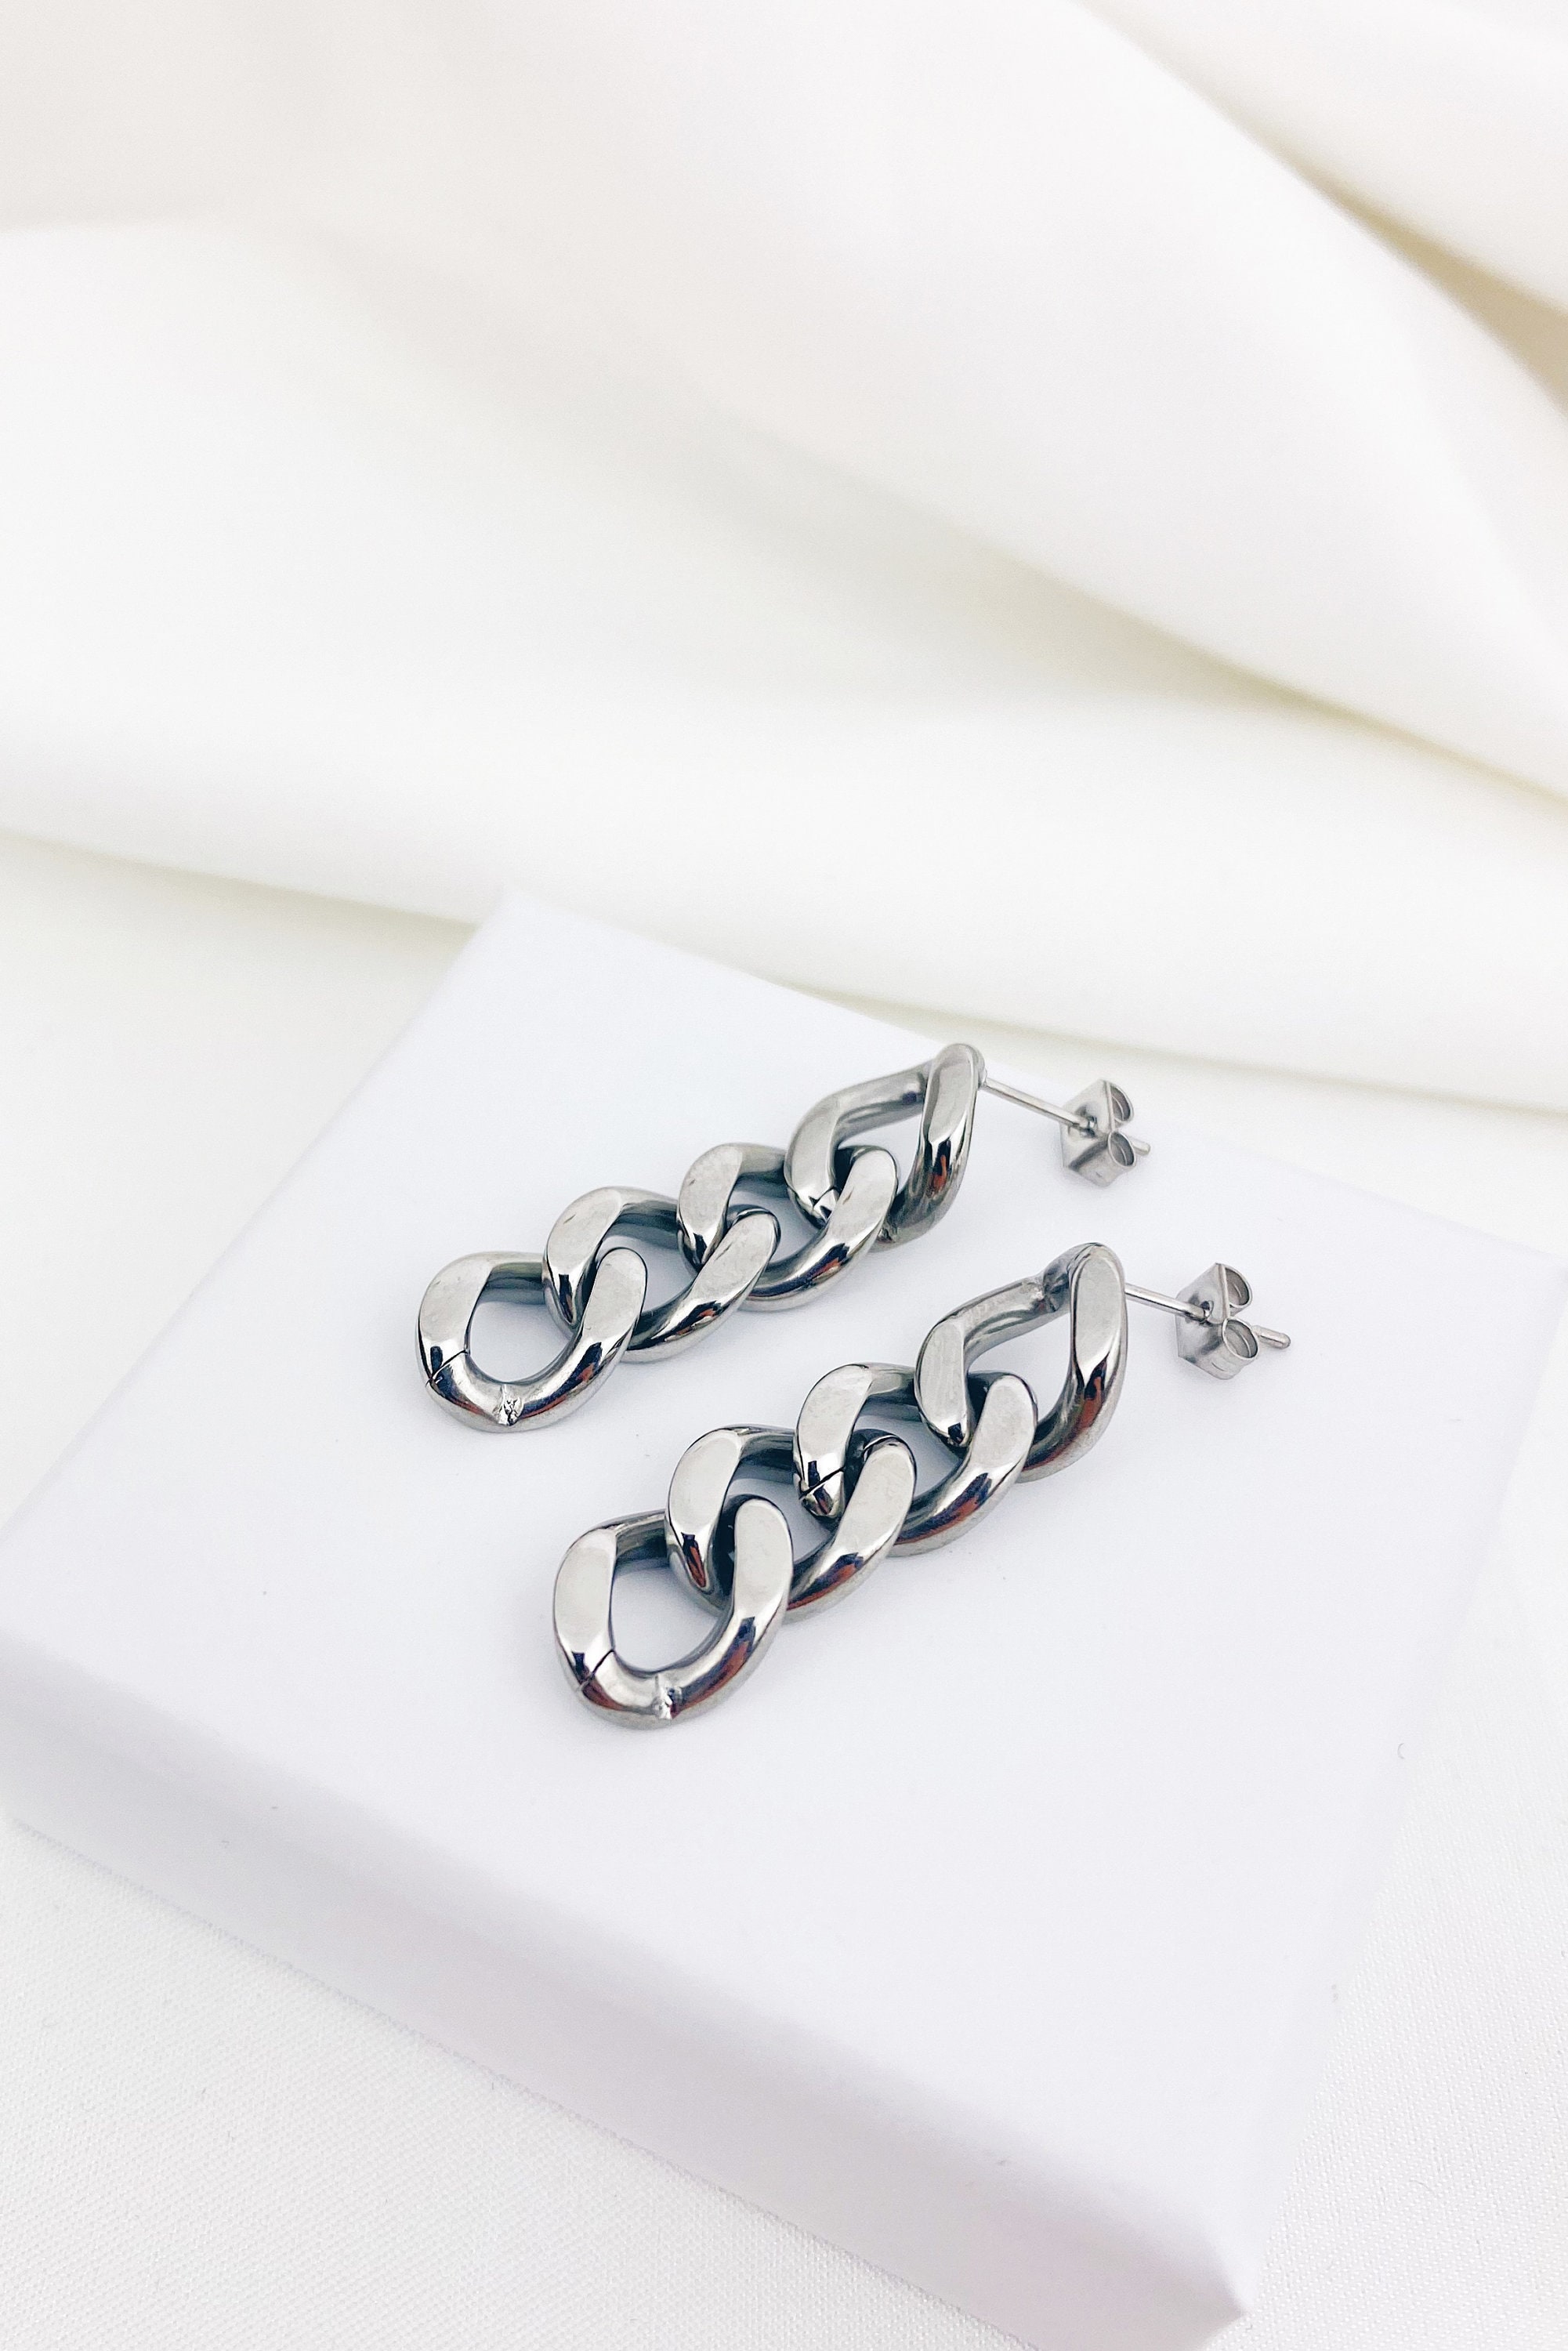 Chunky Curb Chain Earrings in Silver Trendy Blogger Dangle - Etsy